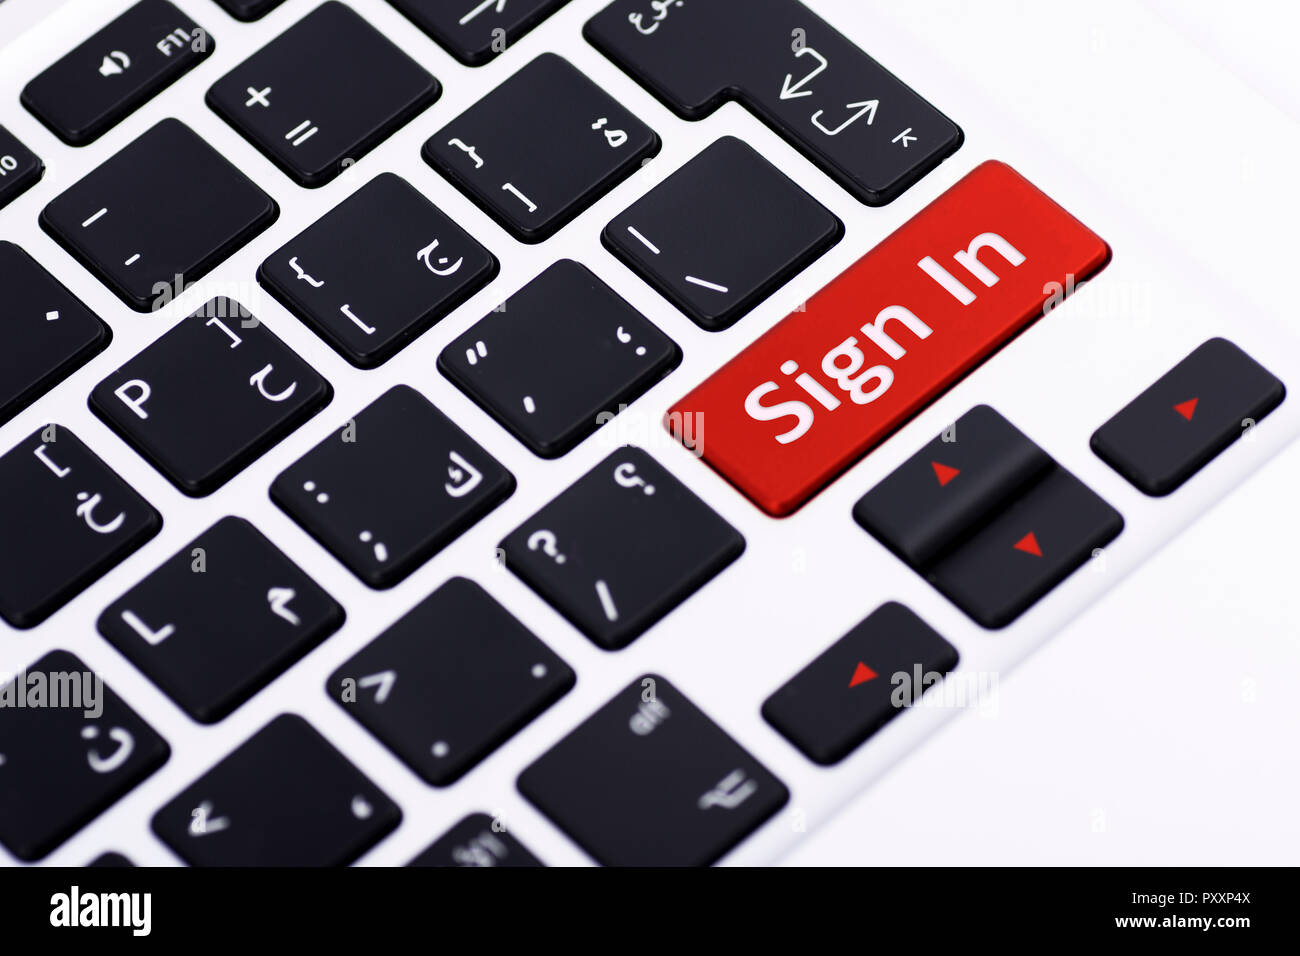 Sign in on keyboard button Stock Photo